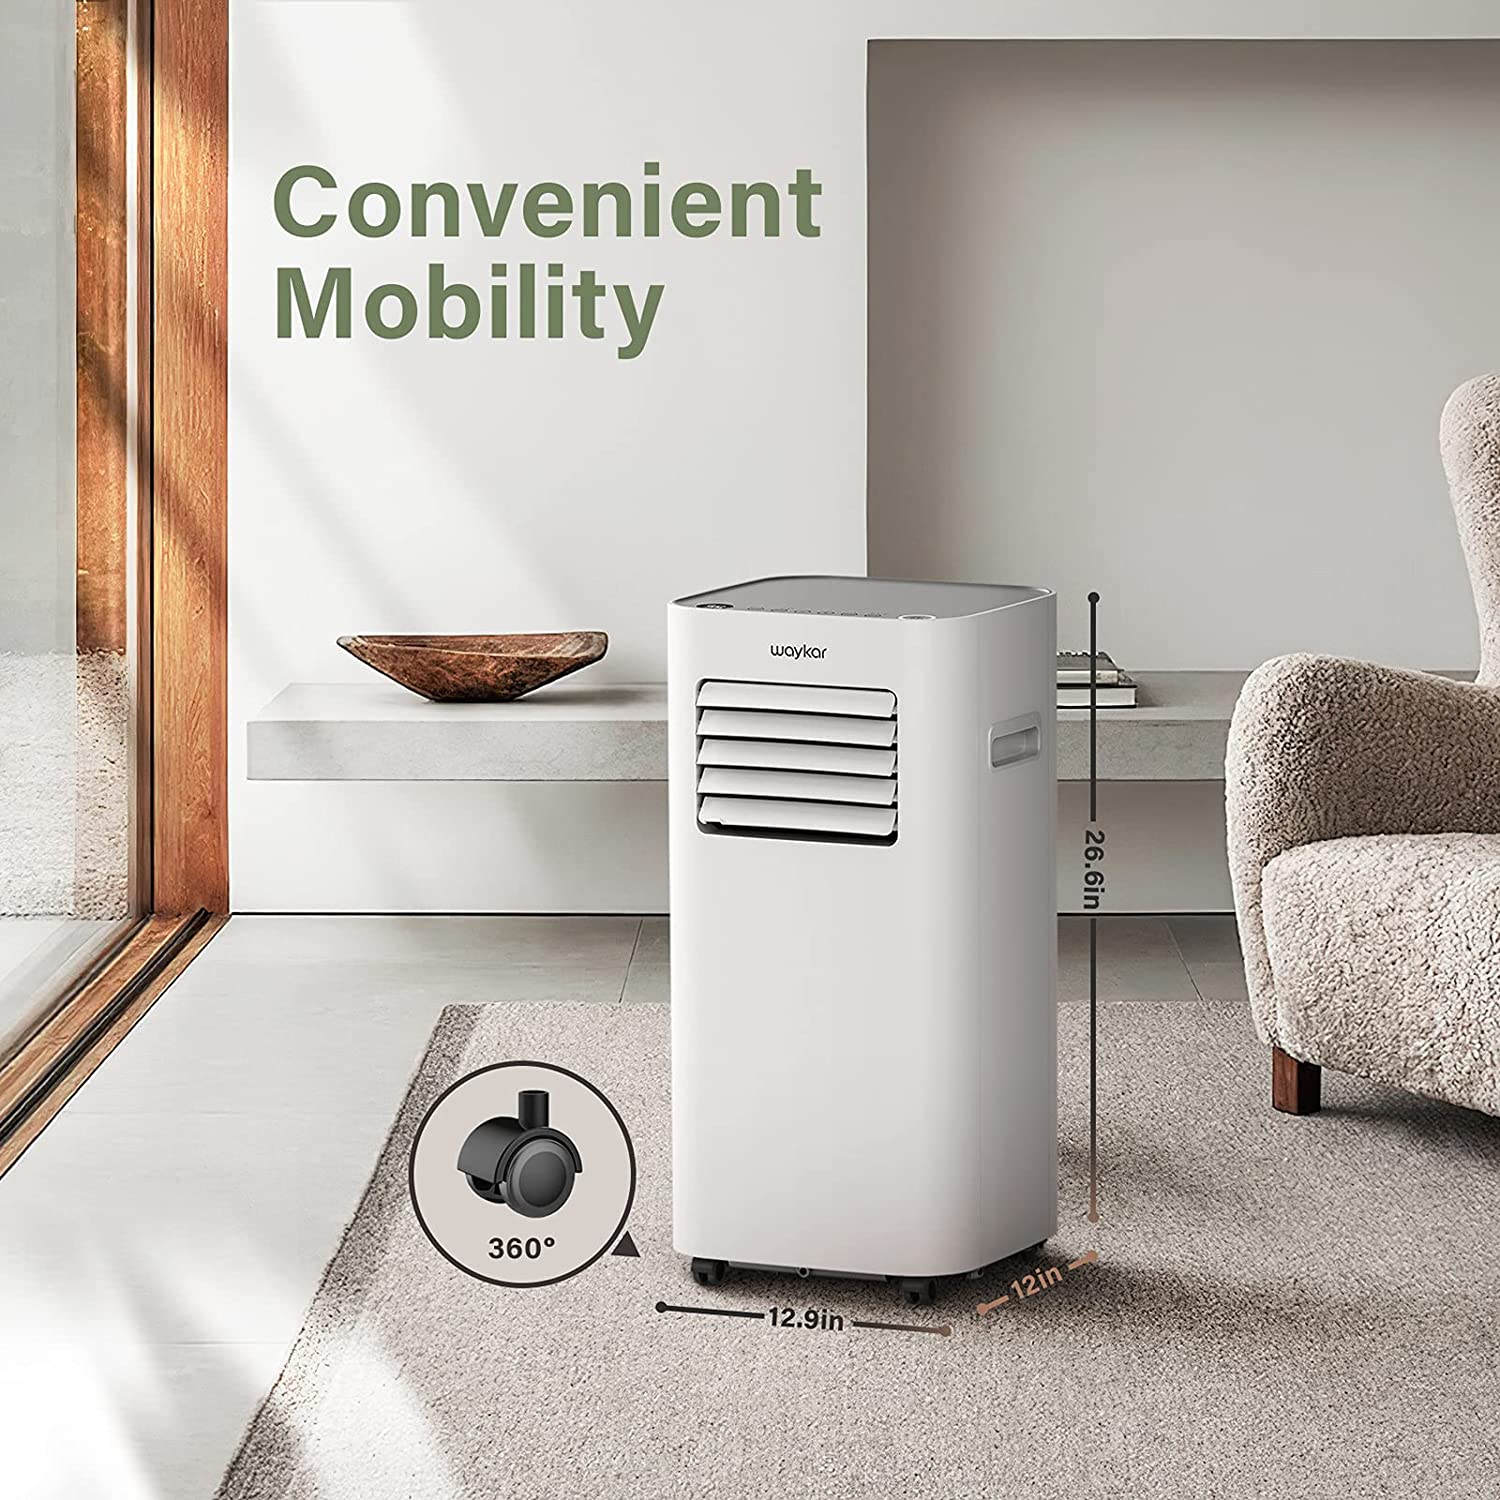 3 in 1 Portable Air Conditioner 10,000 BTU with Dehumidifier and Fan Mode for Rooms up to 300 Sq.Ft for Home,Kitchen,RV,Bedroom